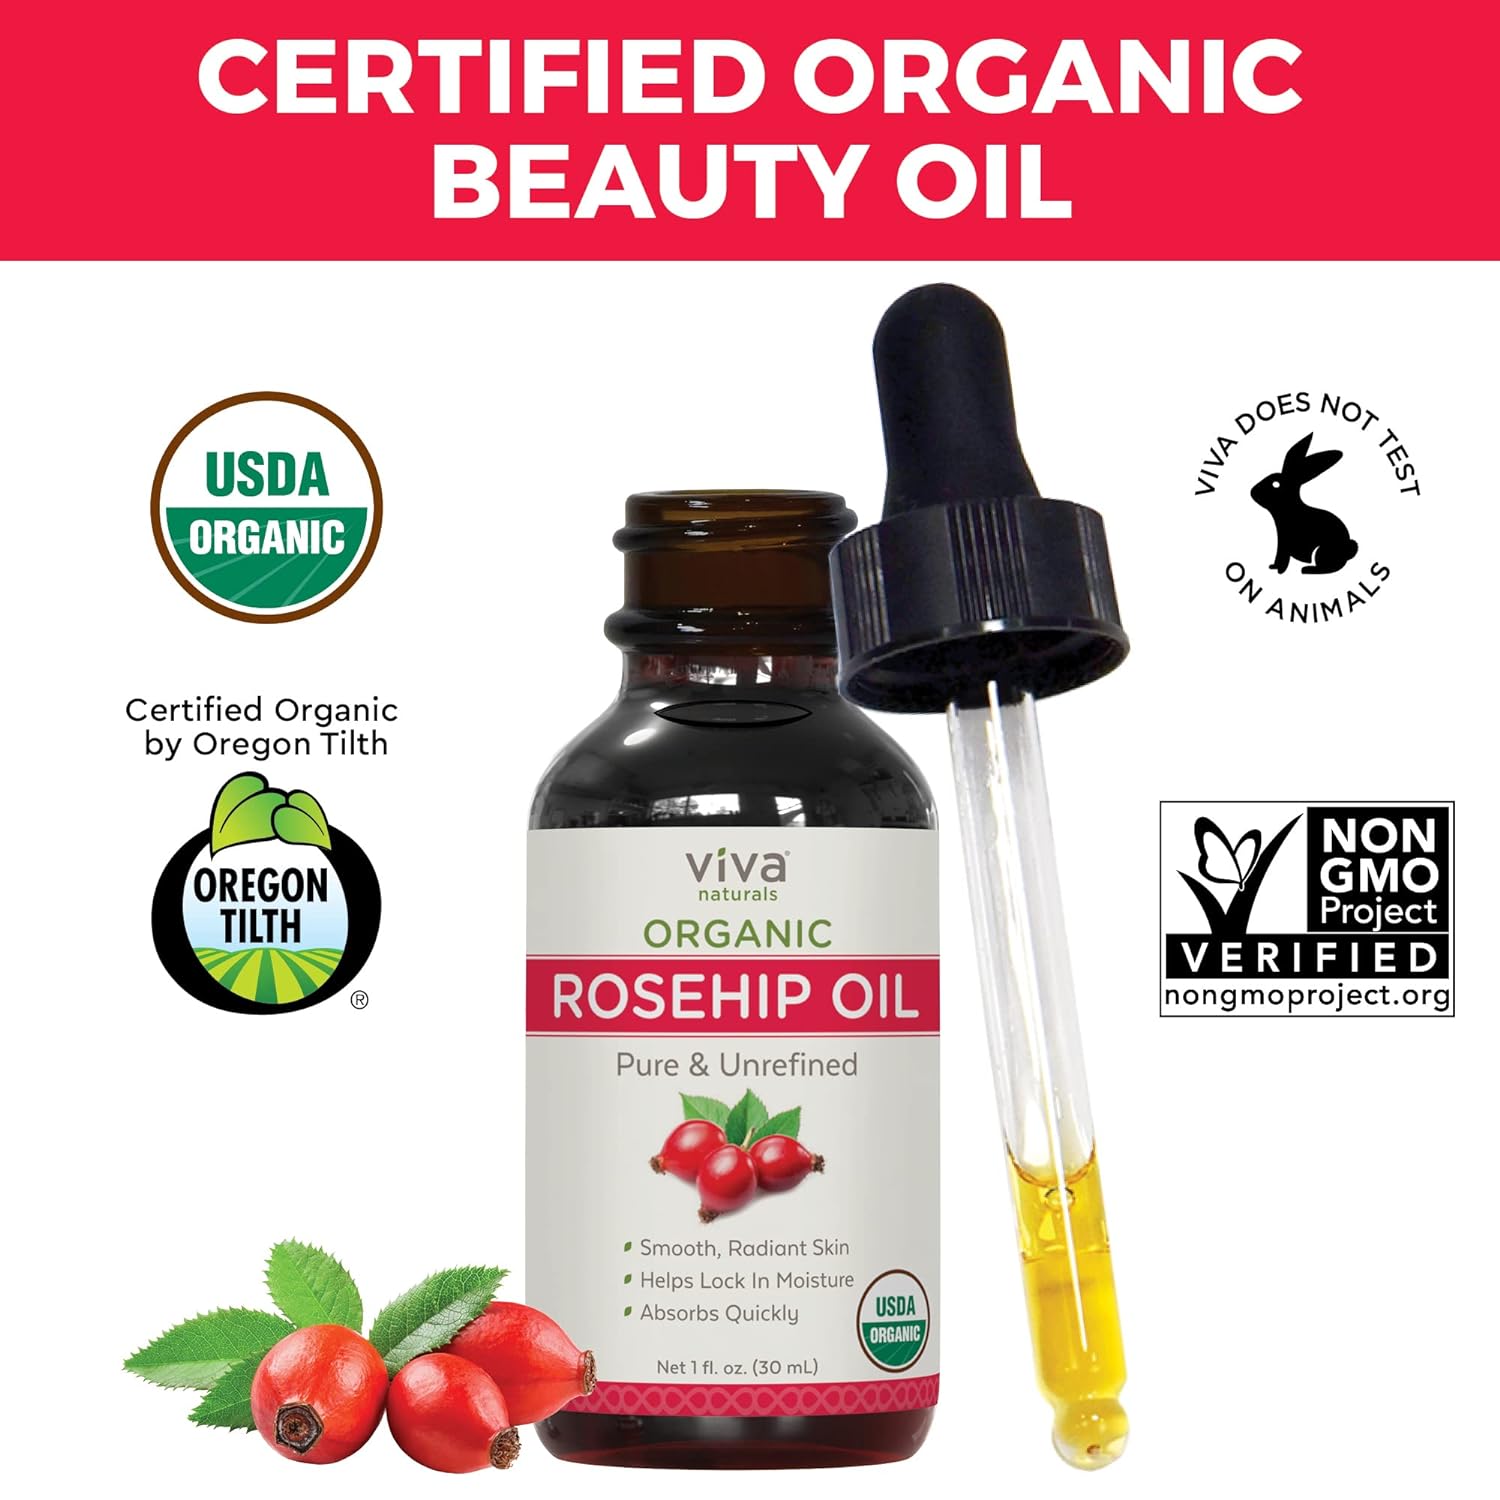 Viva Naturals Organic Rosehip Seed Oil (1 fl oz) - 100% Pure, Cold Pressed Moisturizing Rose hip Oil for Face, Hair, Dry Skin & Nails, Non-GMO : Beauty & Personal Care